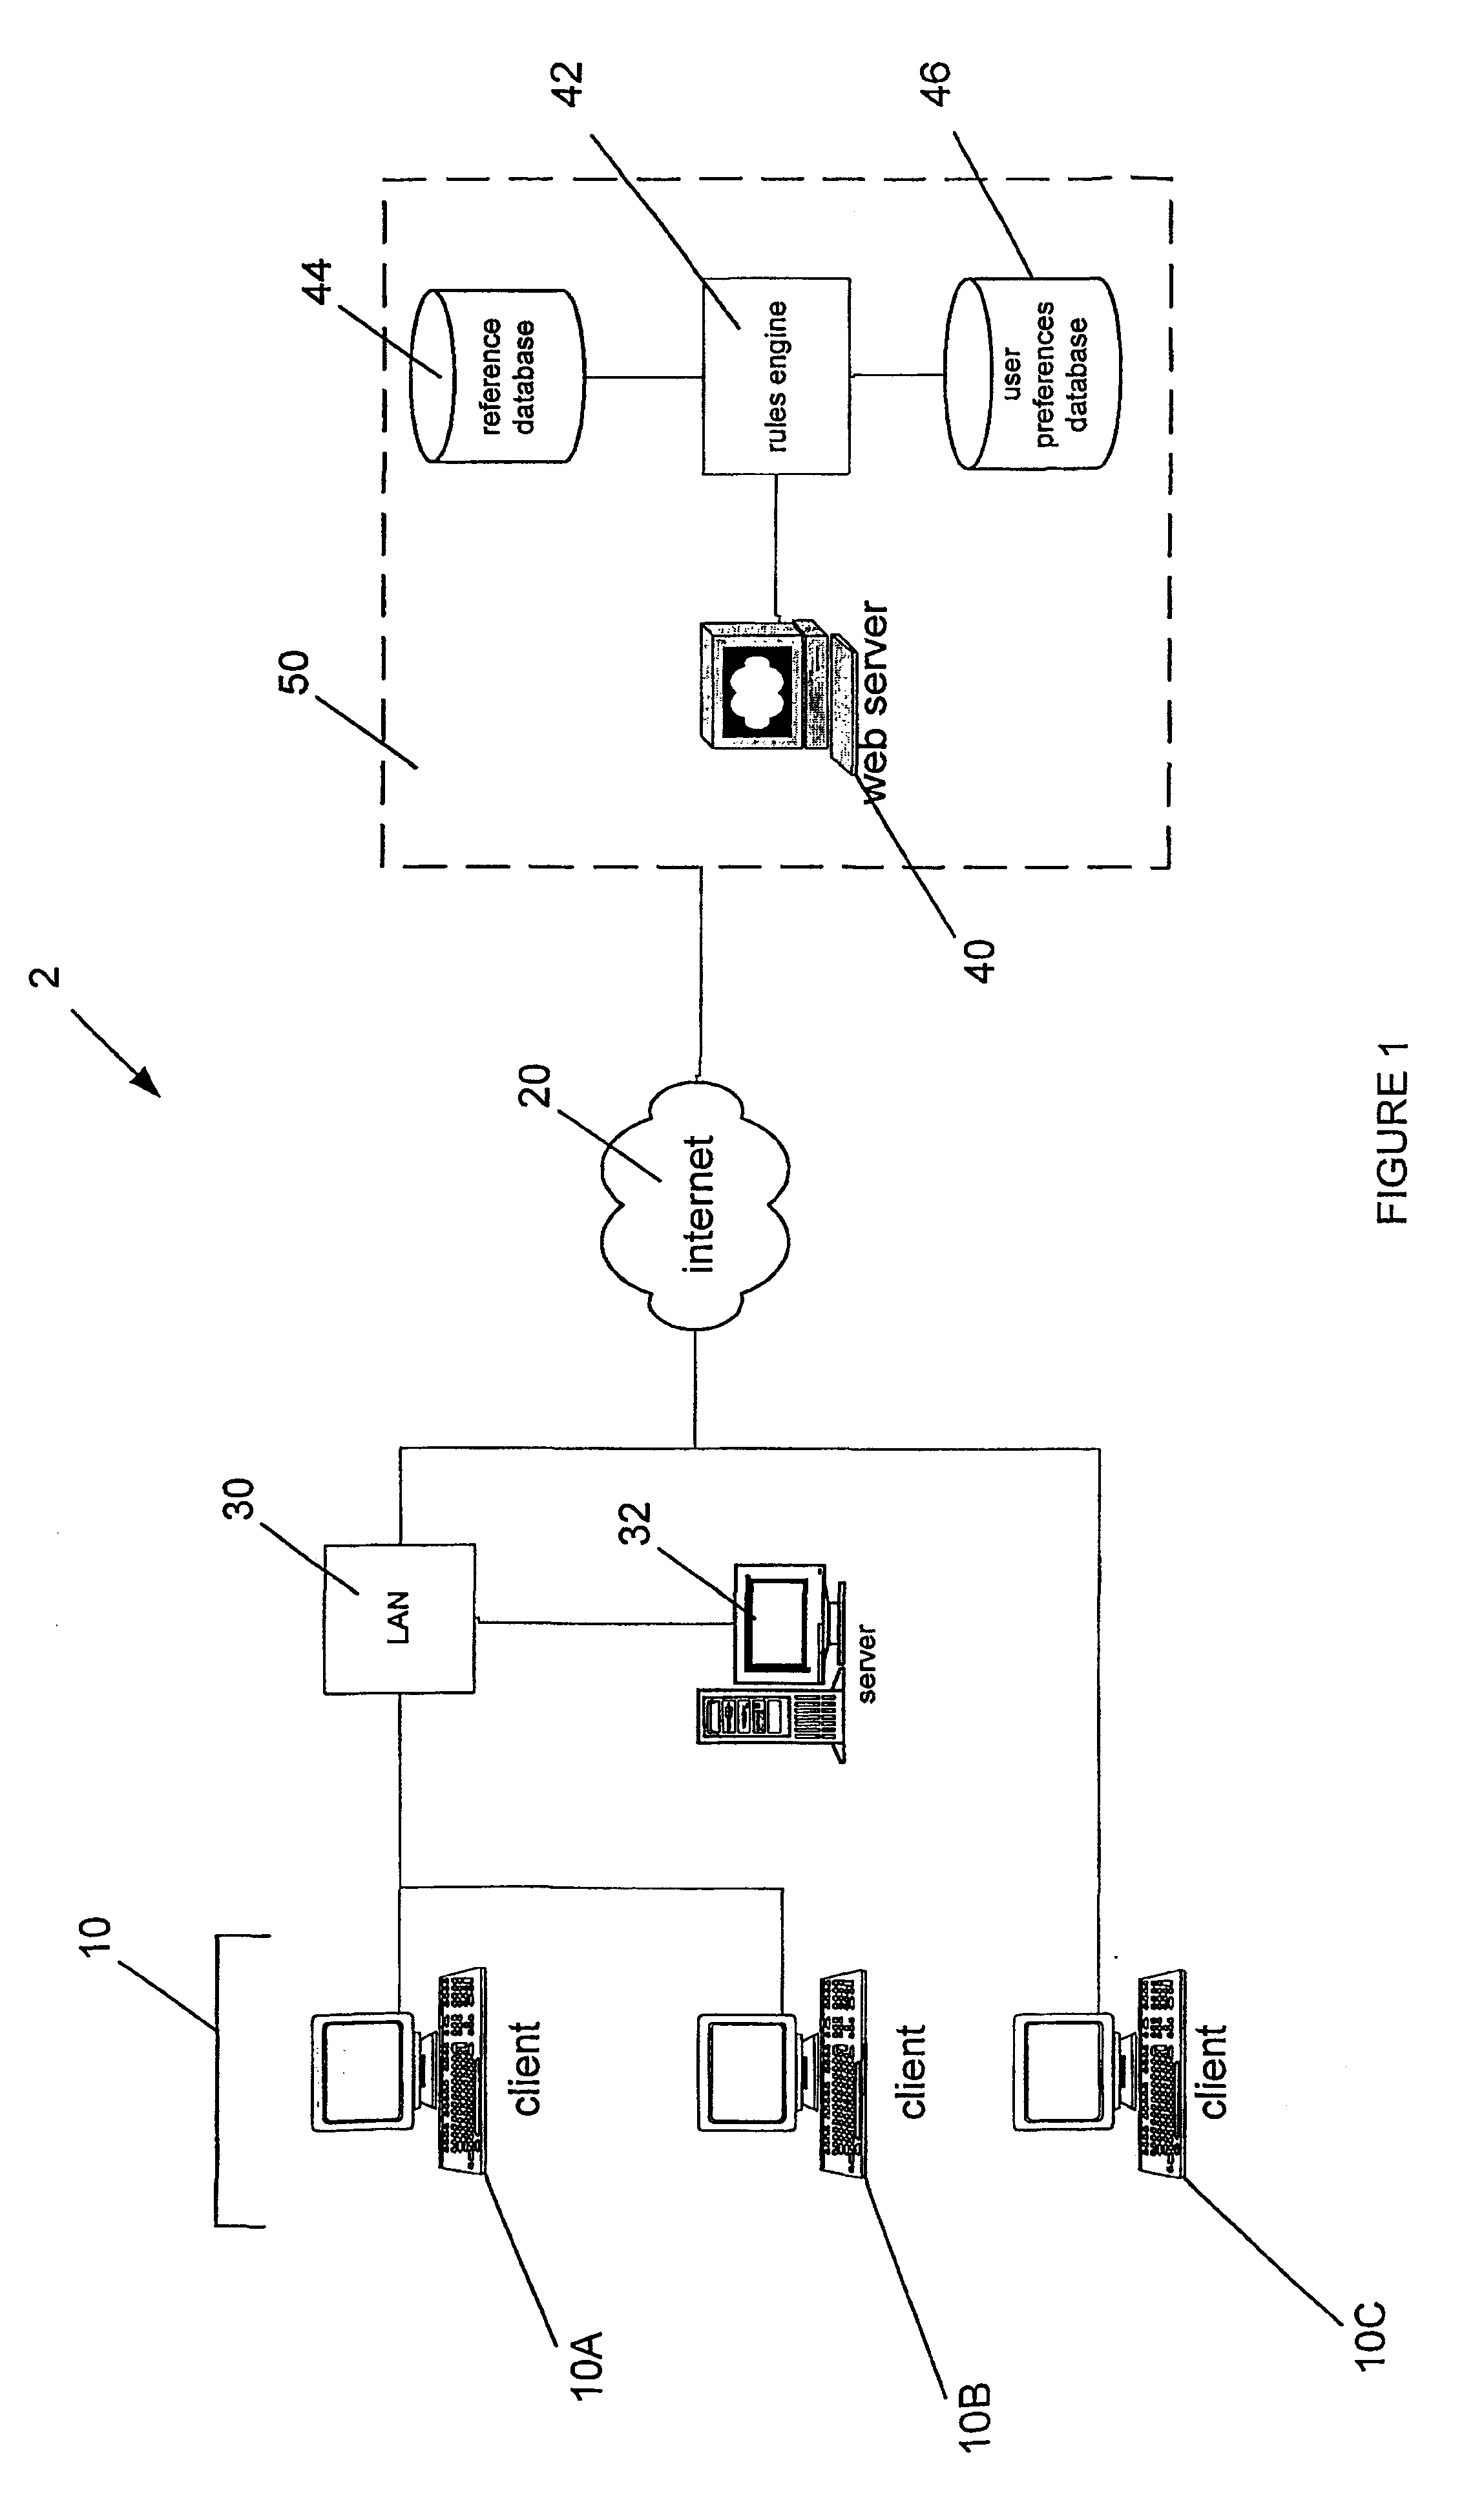 Travel route planner system and method